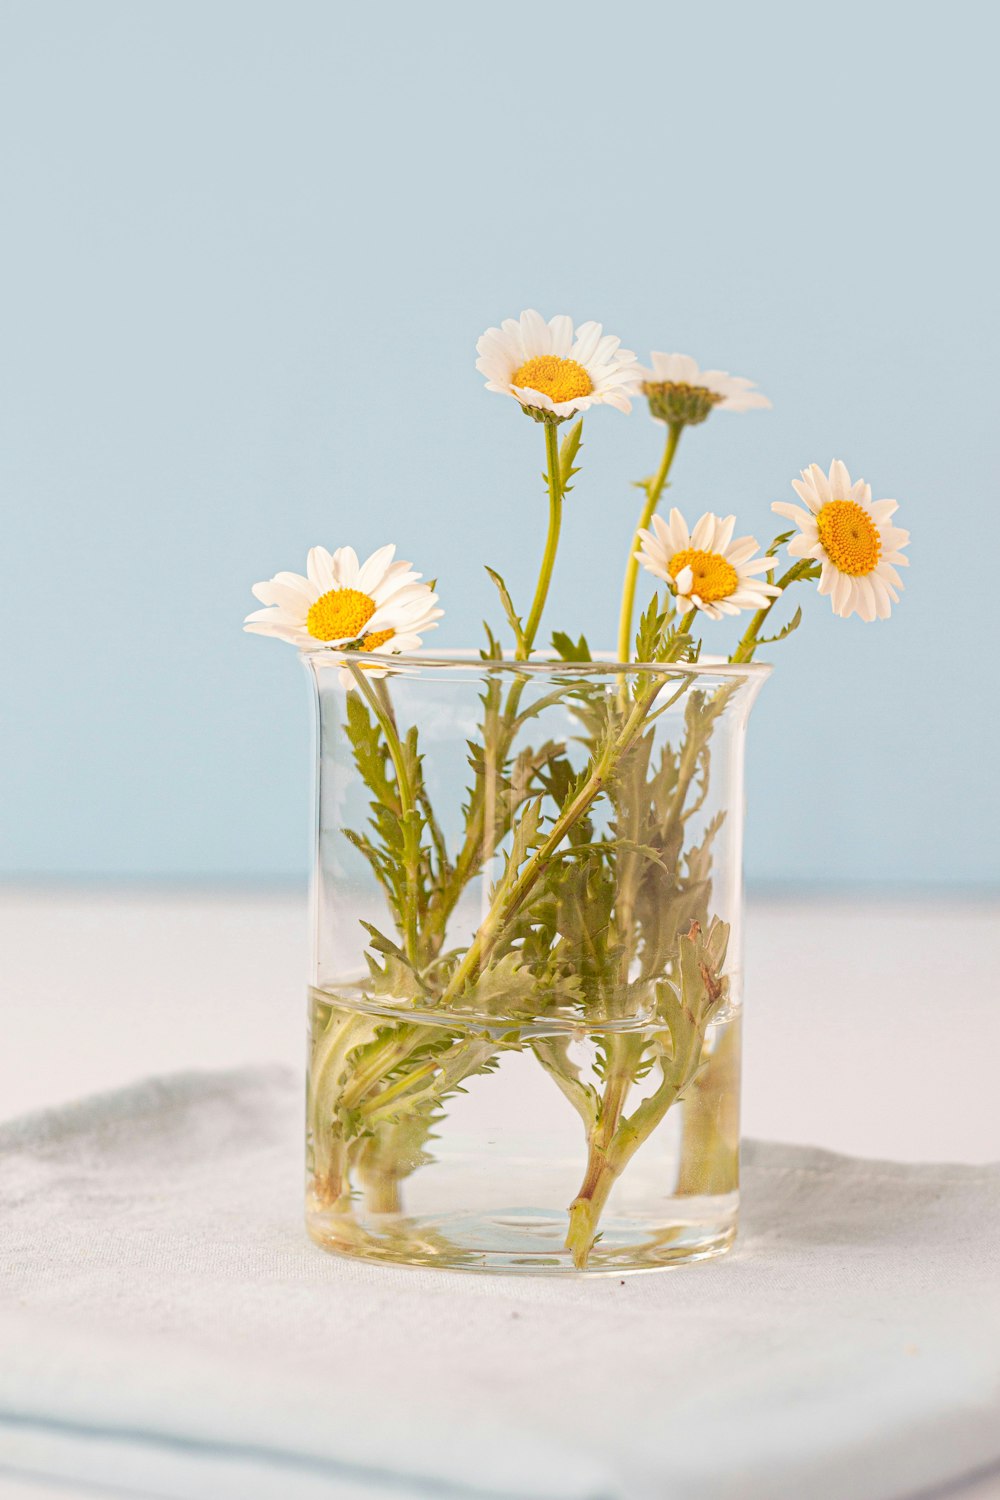 a glass vase filled with water and daisies